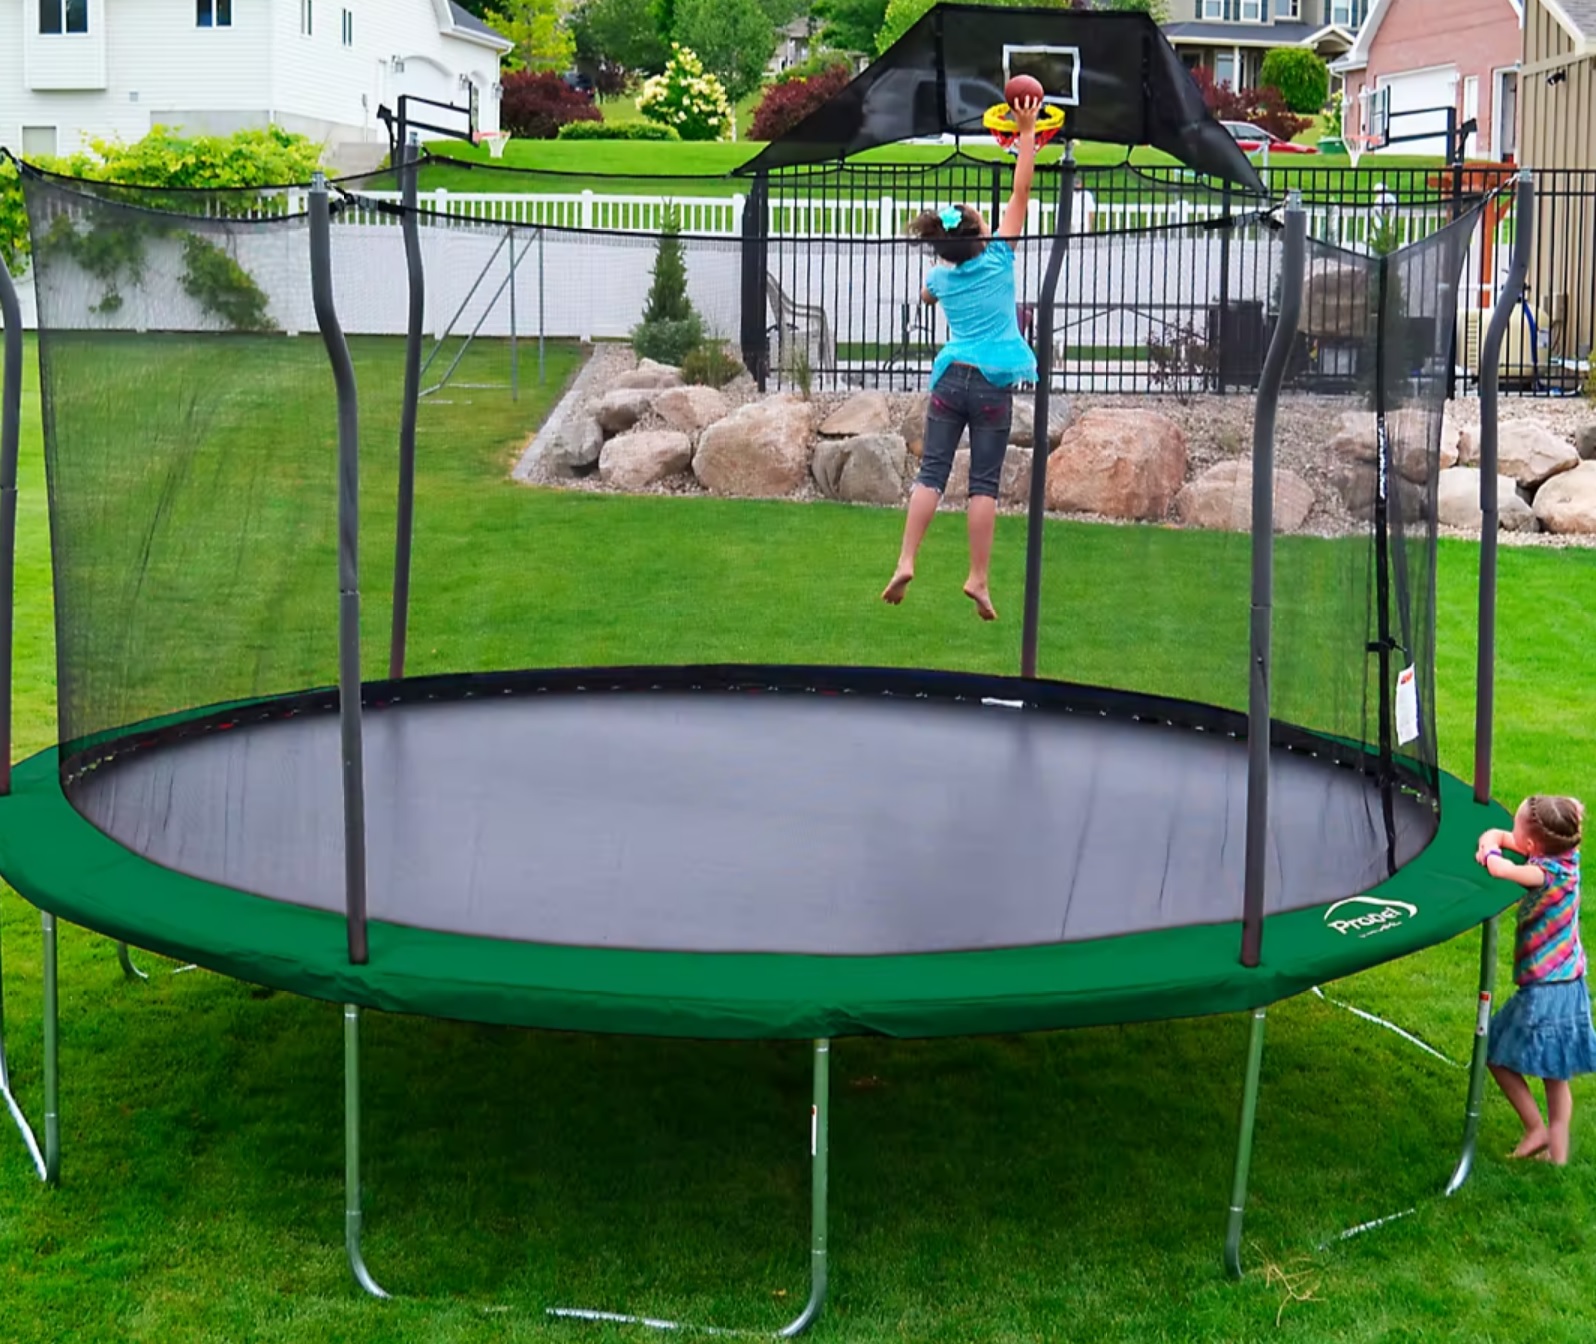 Propel Trampolines 15' Round Trampoline and Detachable Basketball Hoop, Mister and Enclosure - $199.99